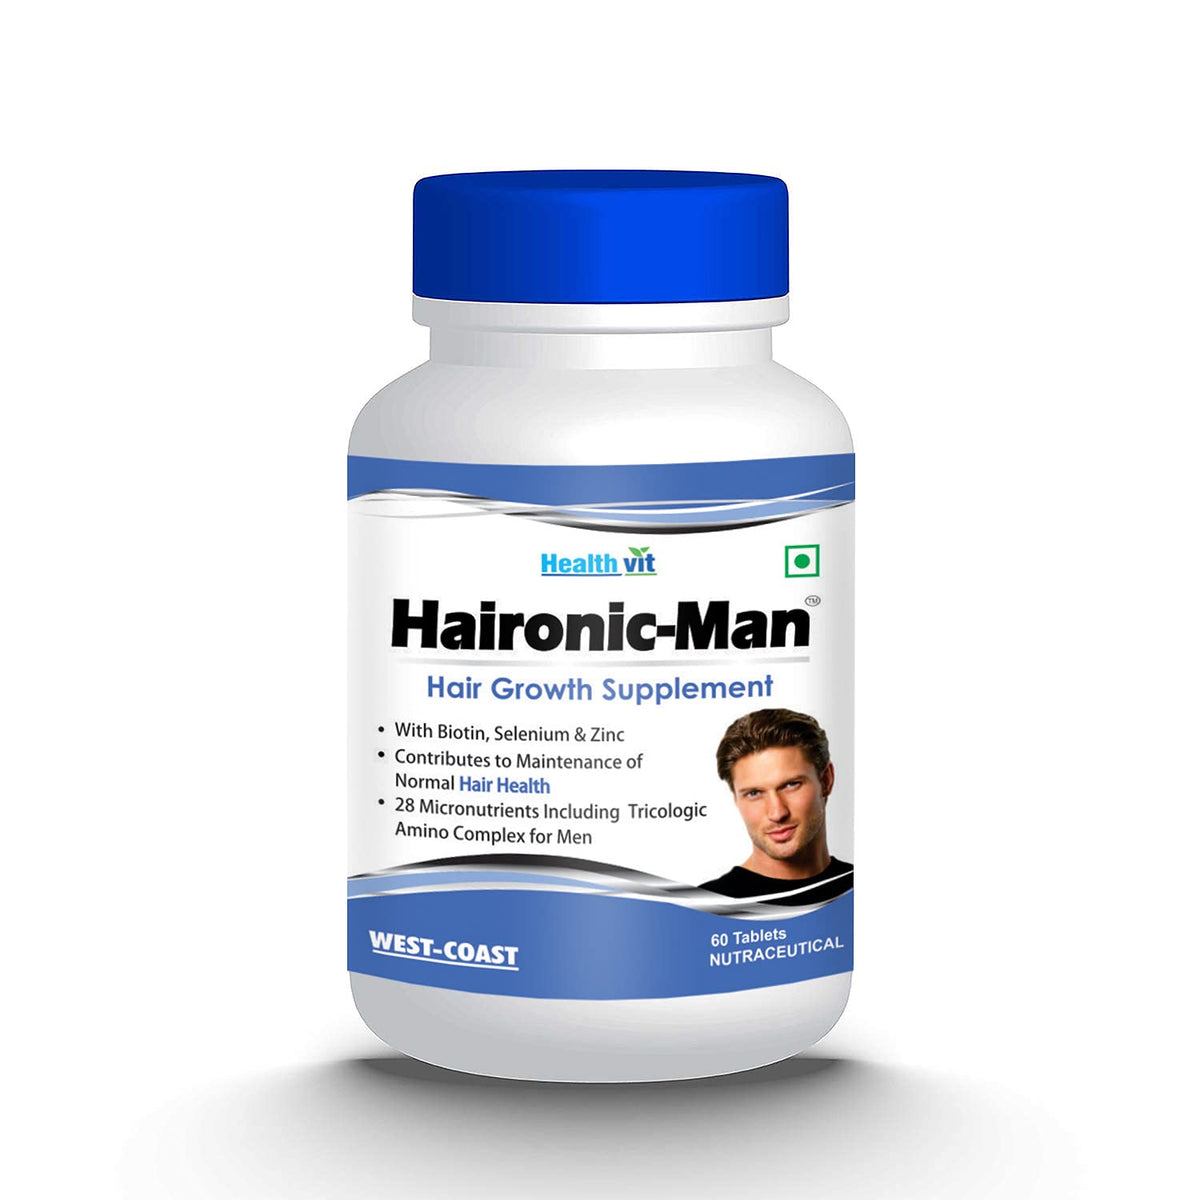 Healthvit Haironic-Man Hair Growth Supplement for Longer, Stronger, Healthier Hair - Scientifically Formulated with Vitamins & Minerals- For All Hair Types - 60 Tablets